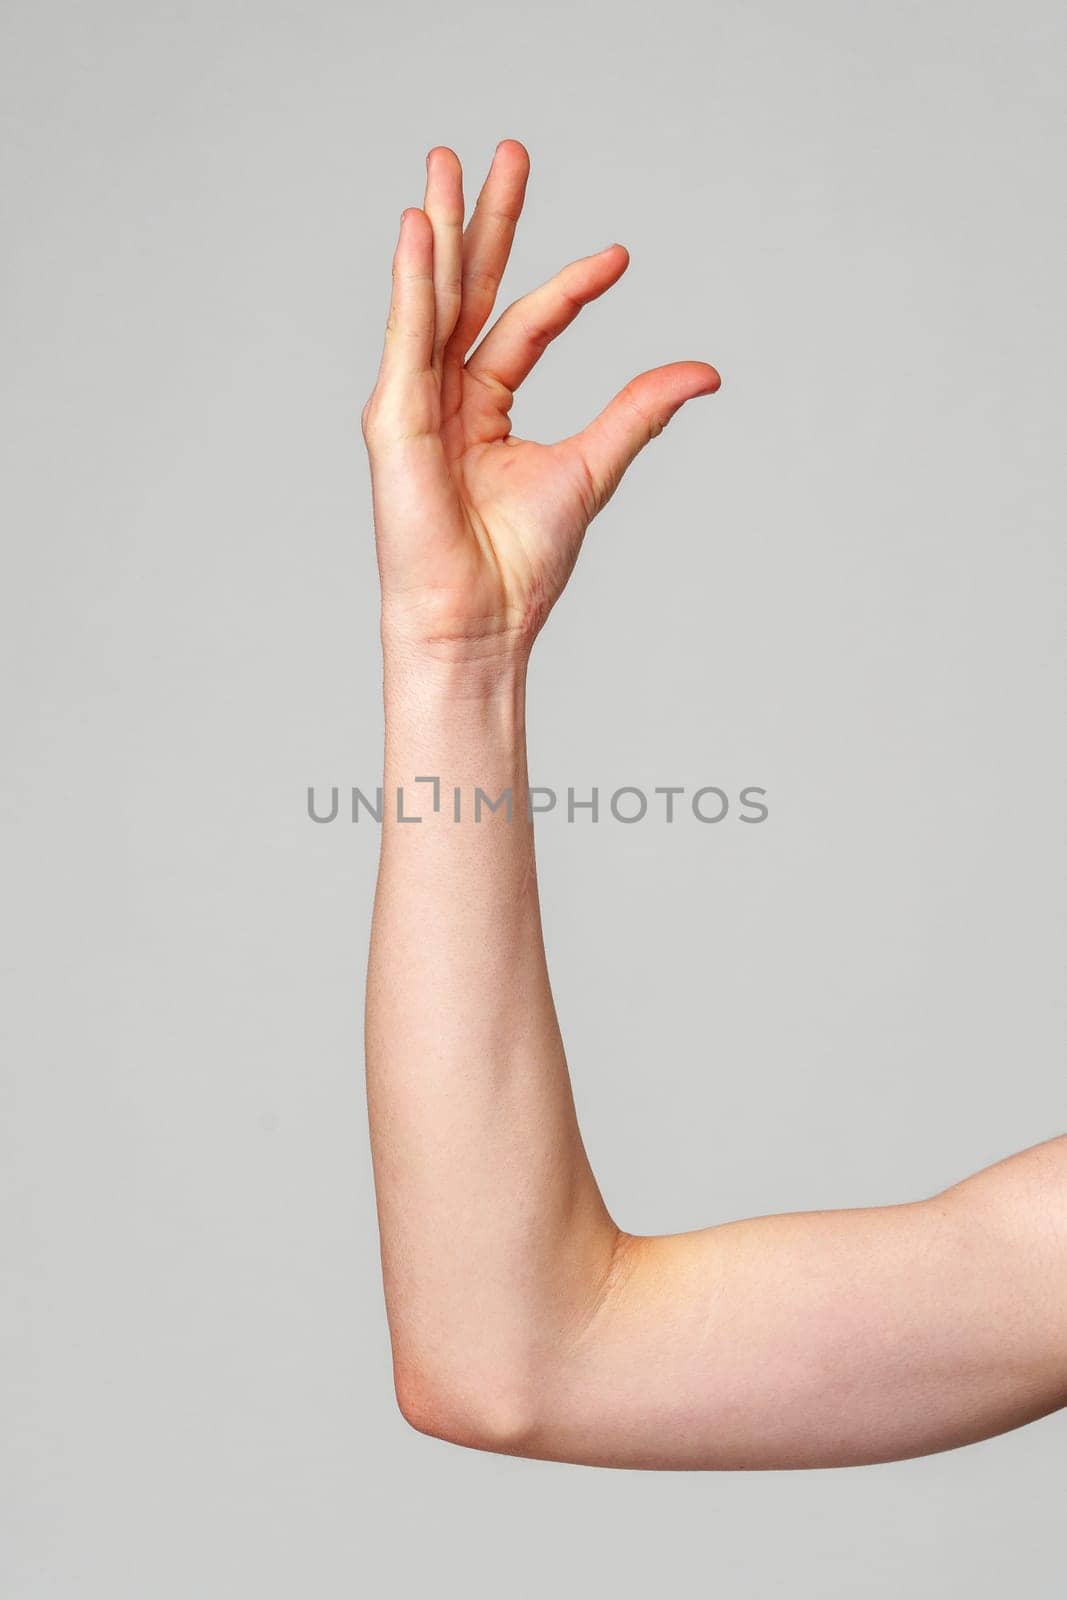 A single human arm is raised, captured in profile with the elbow bent and the hand slightly curved. The arms soft lighting emphasizes its form against the plain, unadorned backdrop.